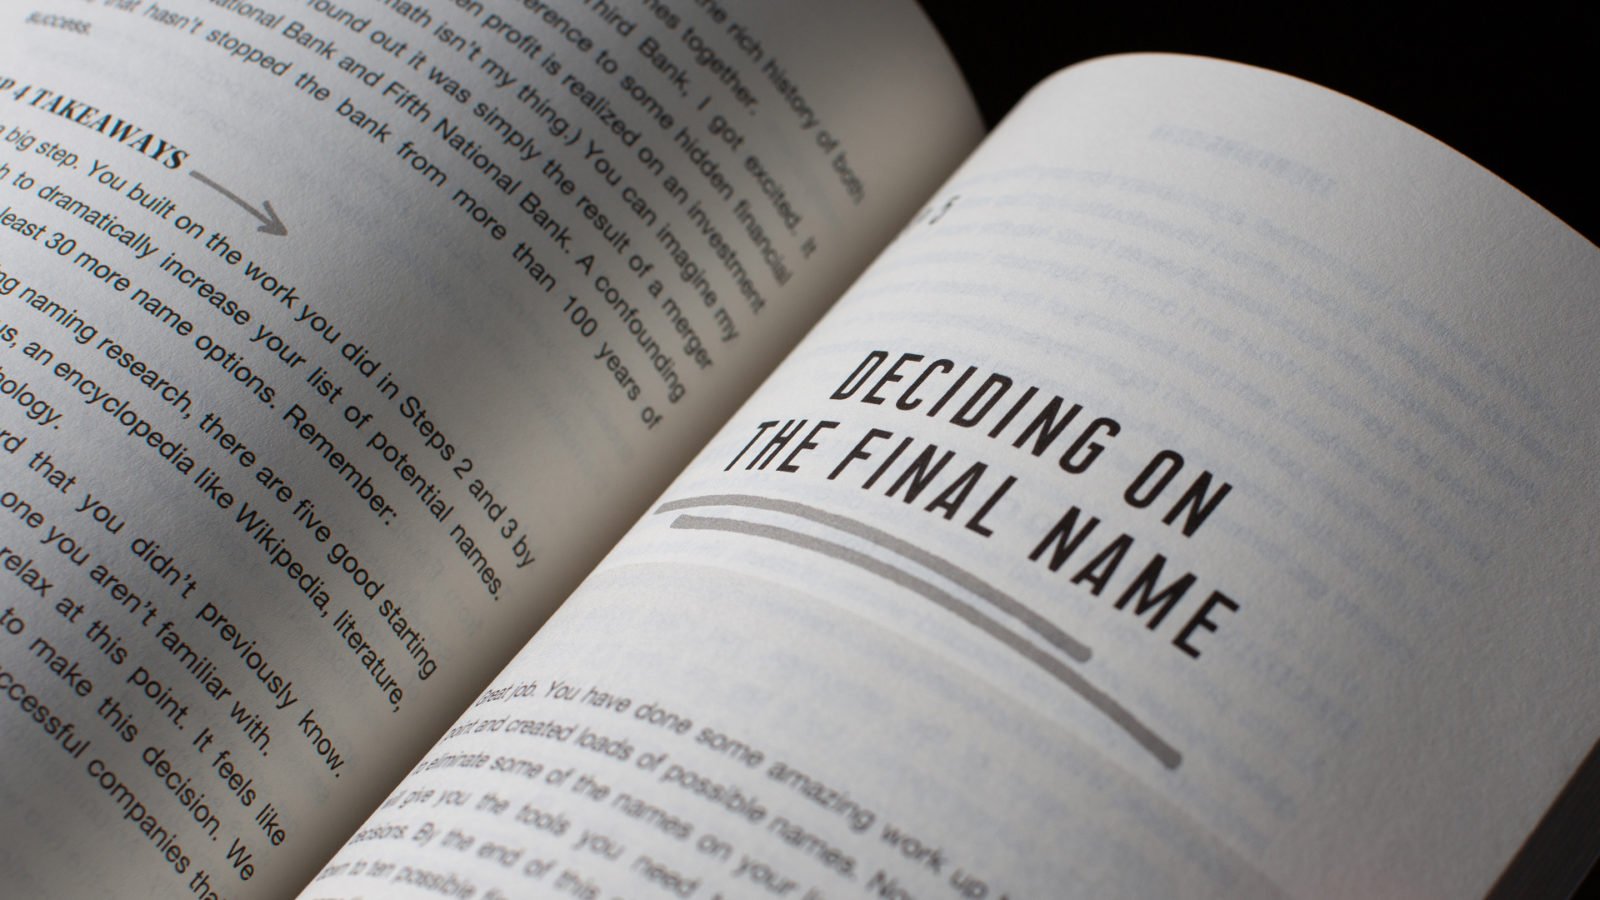 The Naming Book Photography: Open Pages to Deciding on a Final Name